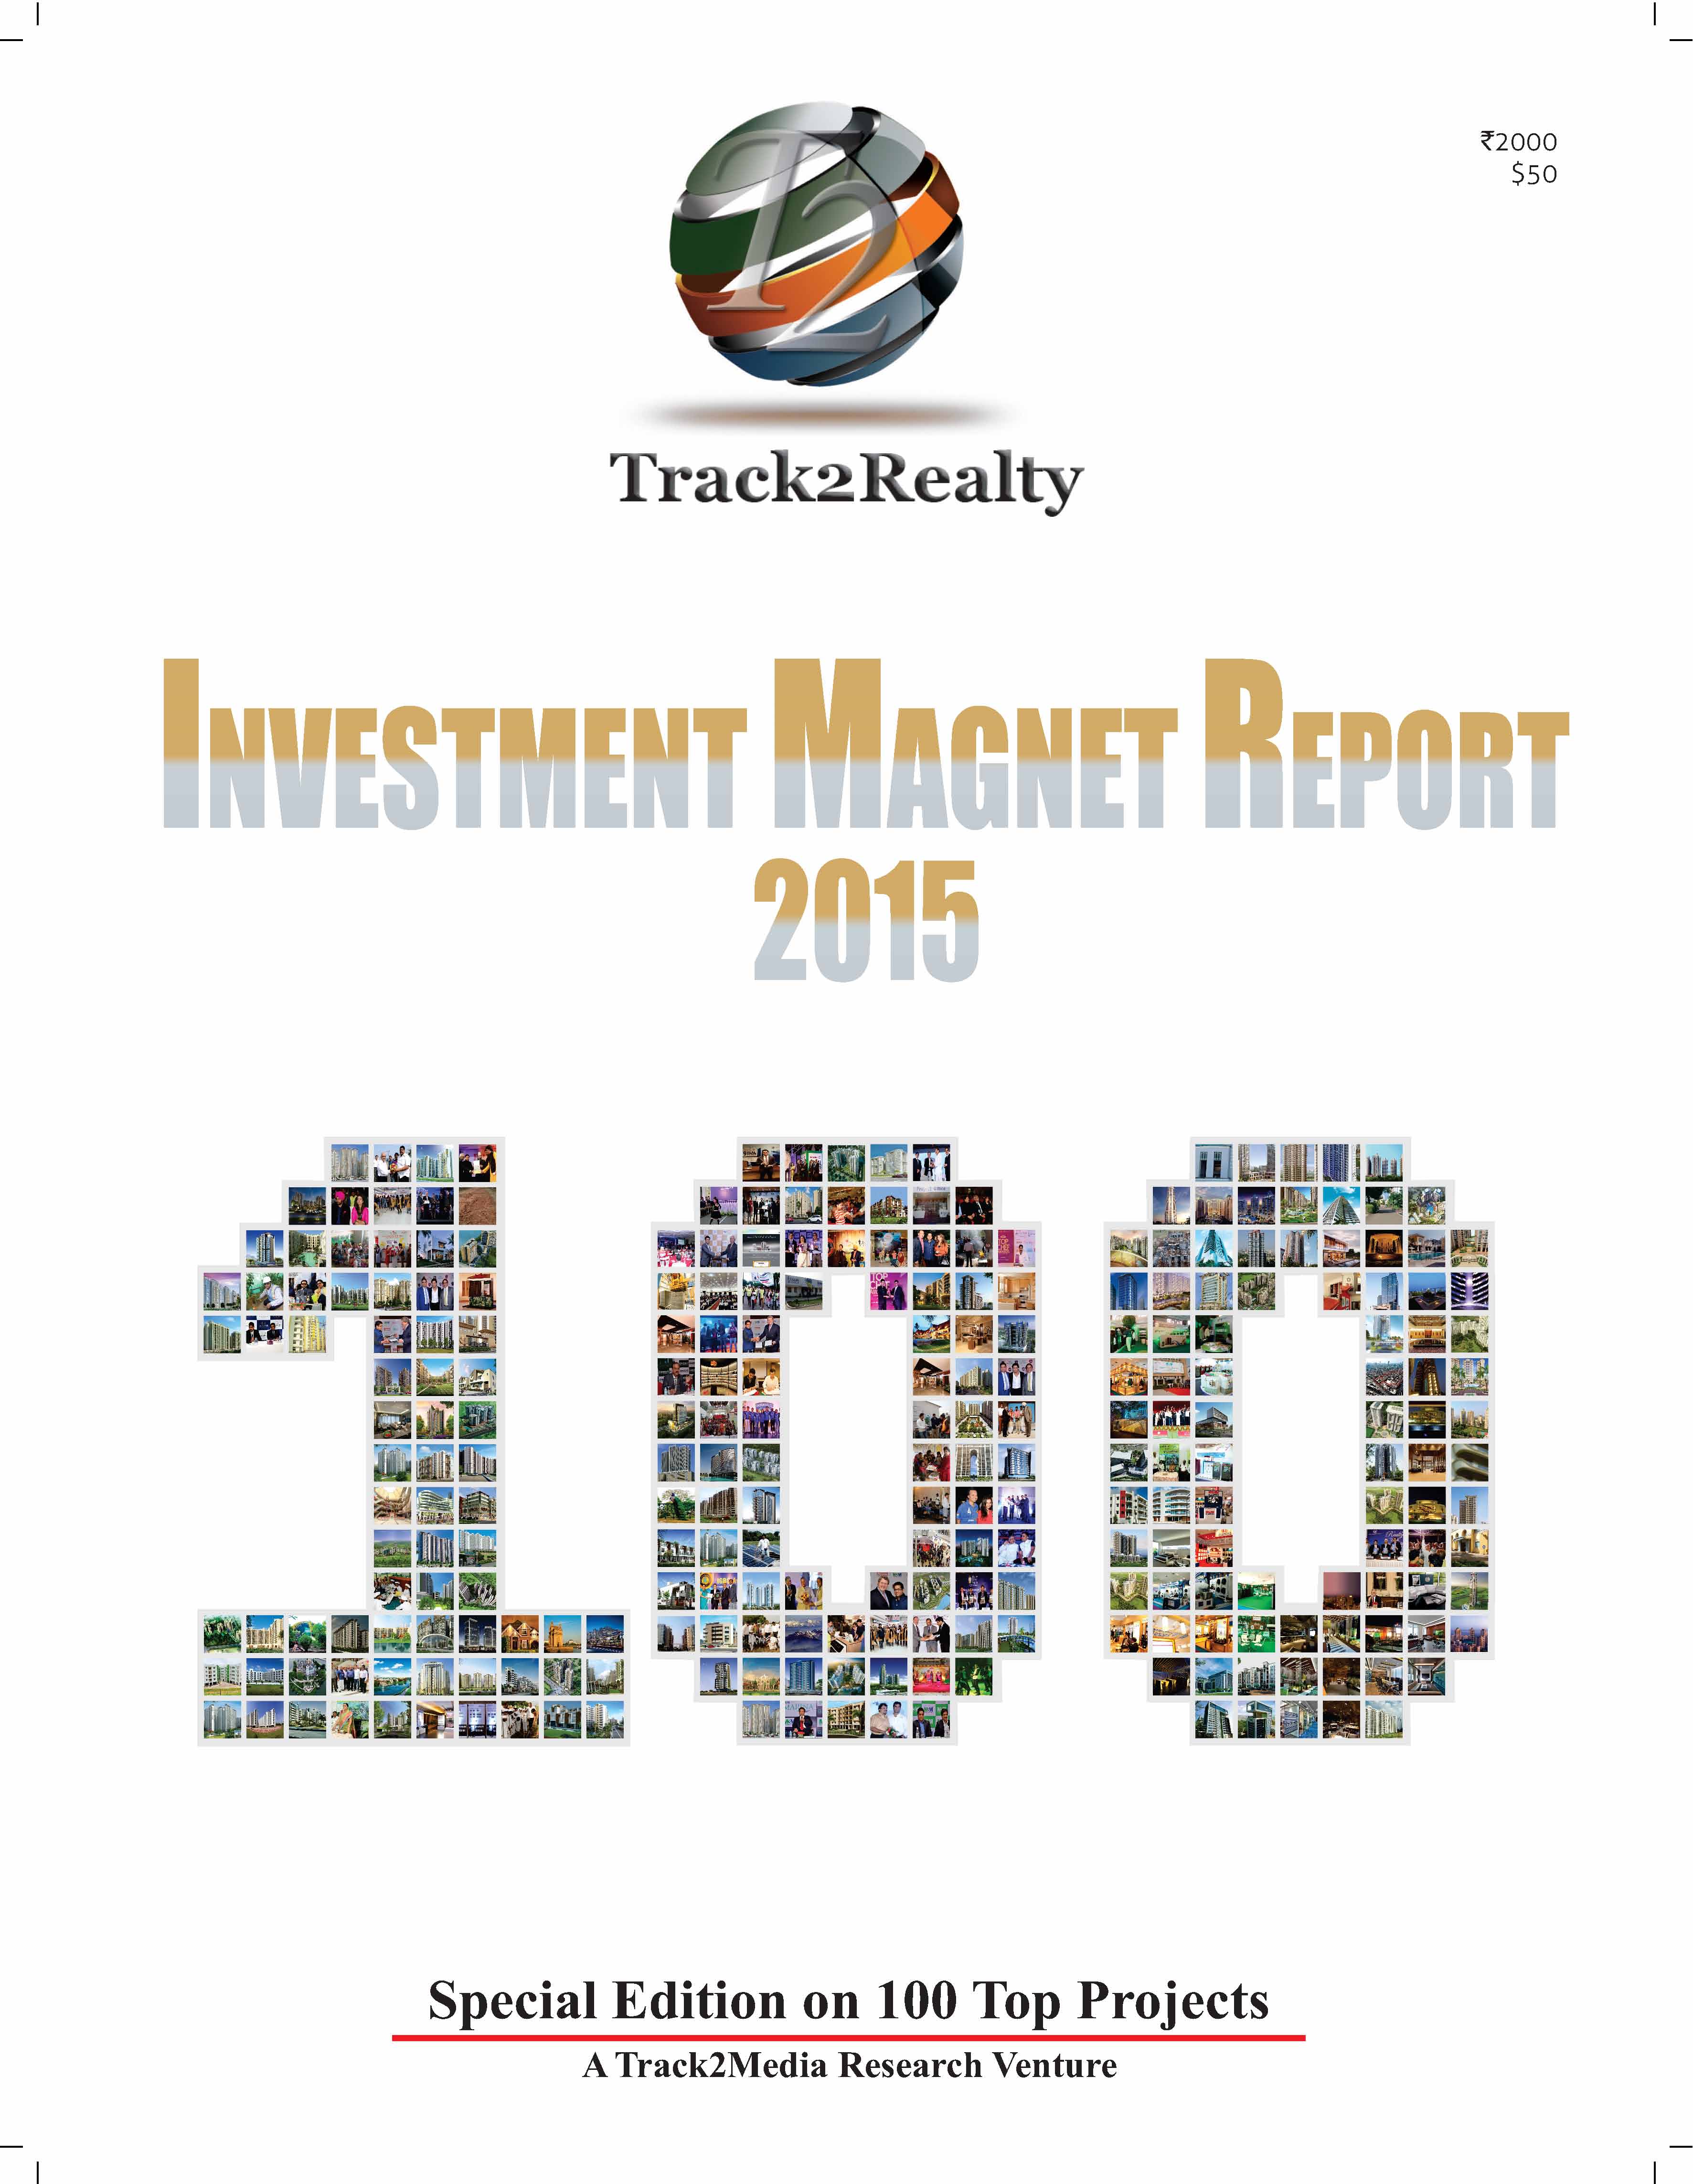 Track2Realty Investment Magnet Report 2015, Track2Media Research Pvt Ltd, Indian property investment guide, Best housing projects in India, Top residential project in India, NRI investment choice, Indian real estate market, India property market